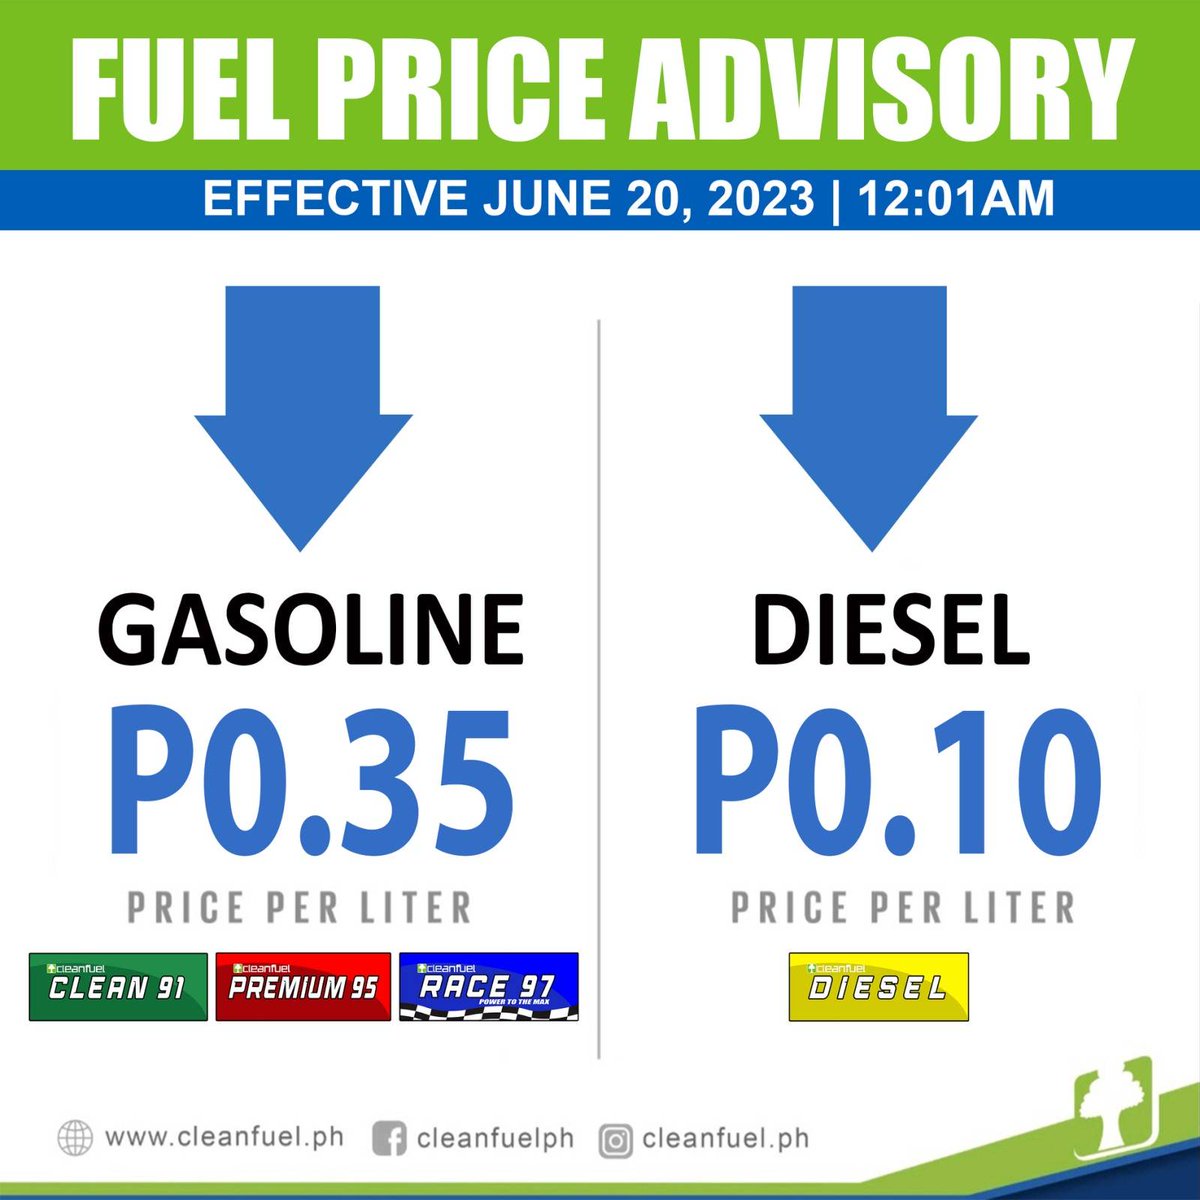 Cleanfuel will implement price adjustment, effective Tuesday, June 20, 2023 at 12:01AM. 
⬇️ Diesel - 0.10/L (Rollback) 
⬇️ Gasoline - 0.35/L (Rollback) 
Make sure to fill up your tanks at your nearest #Cleanfuel station to experience #QualityFuelForLess